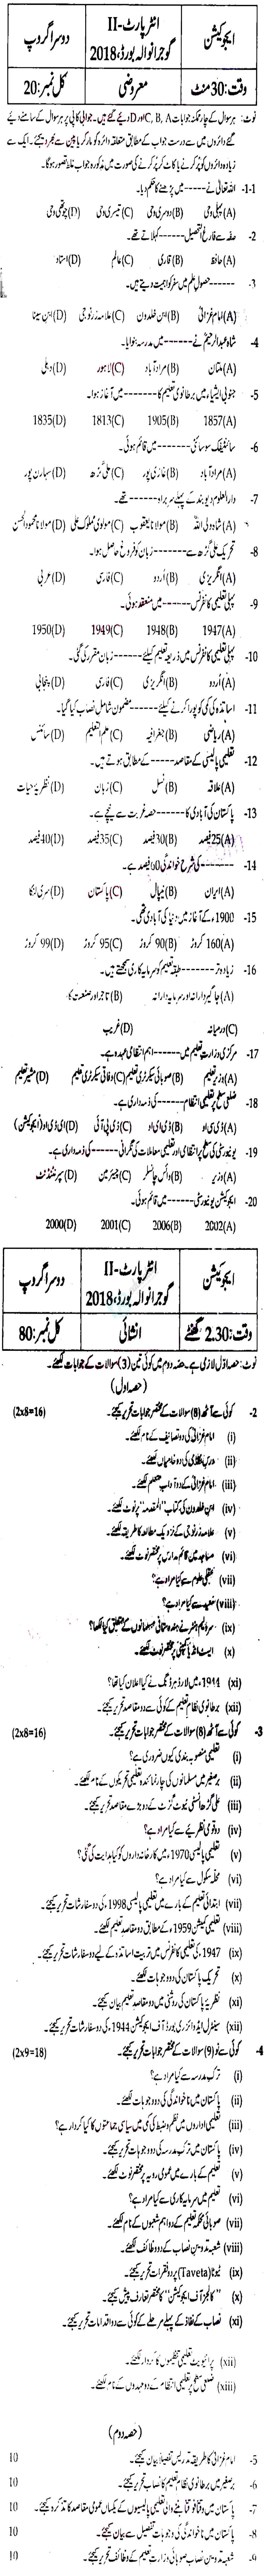 Education FA Part 2 Past Paper Group 2 BISE Gujranwala 2018